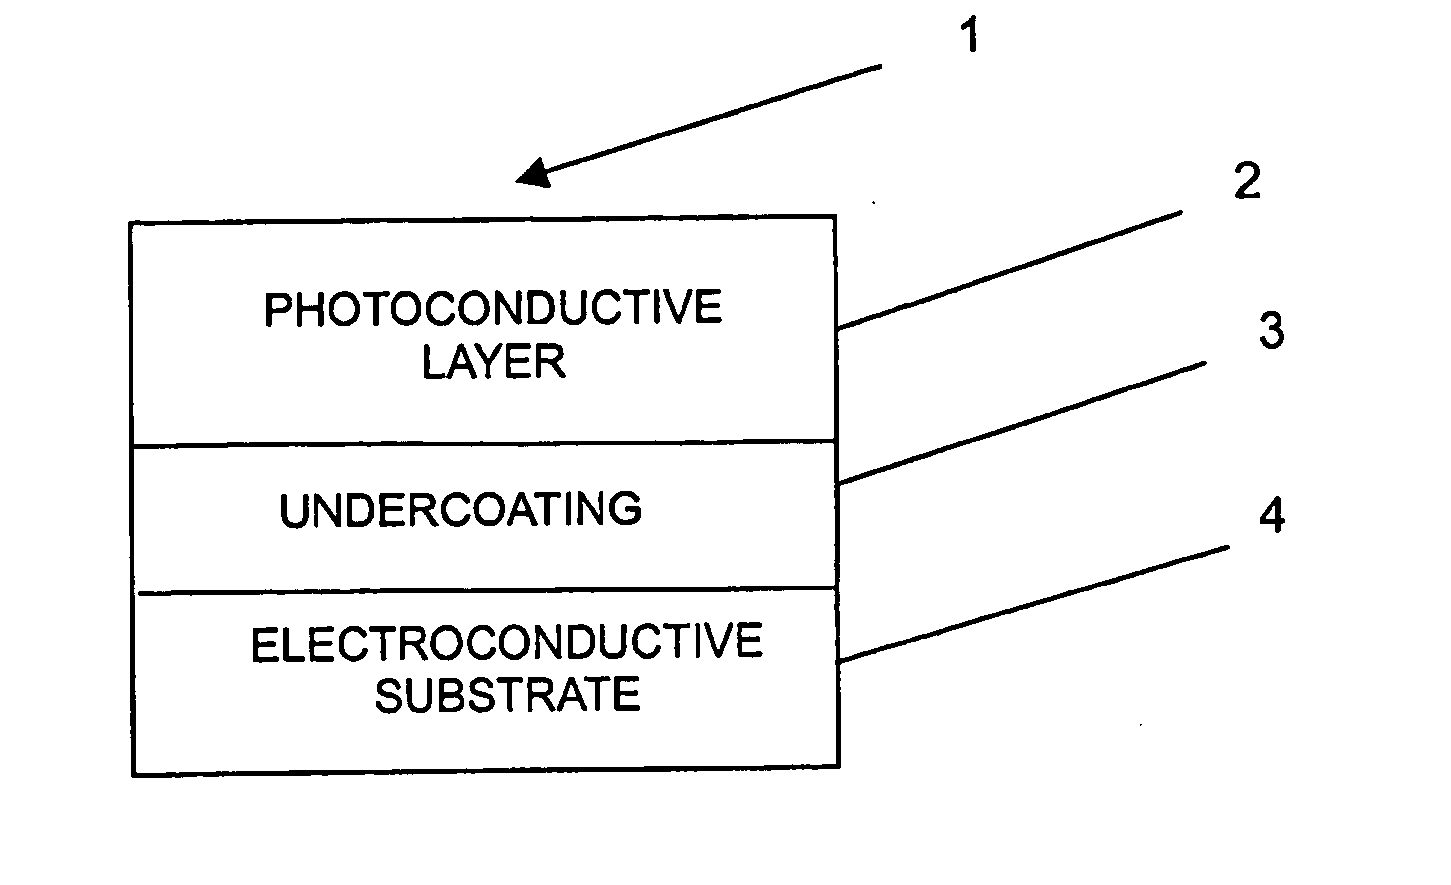 Naphthalene tetracarboxylic diimide based polymer, electrophotographic photoreceptor containing the same, and electrophotographic cartridge, electrophotographic drum and electrophotographic image forming apparatus comprising the electrophotographic photoreceptor